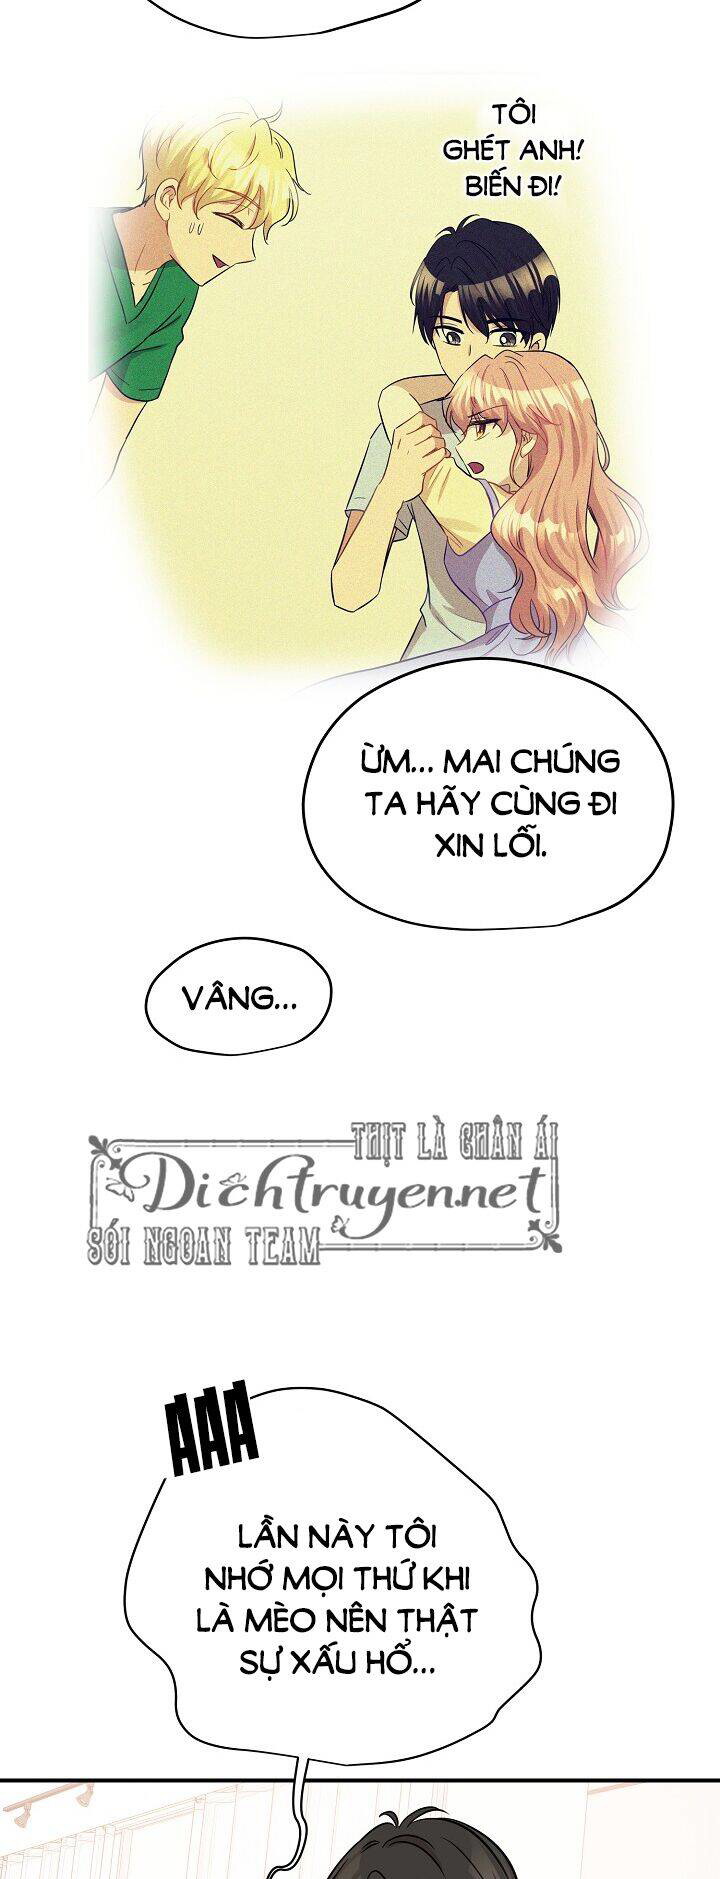 cuoc-song-ky-thu-chap-43-10